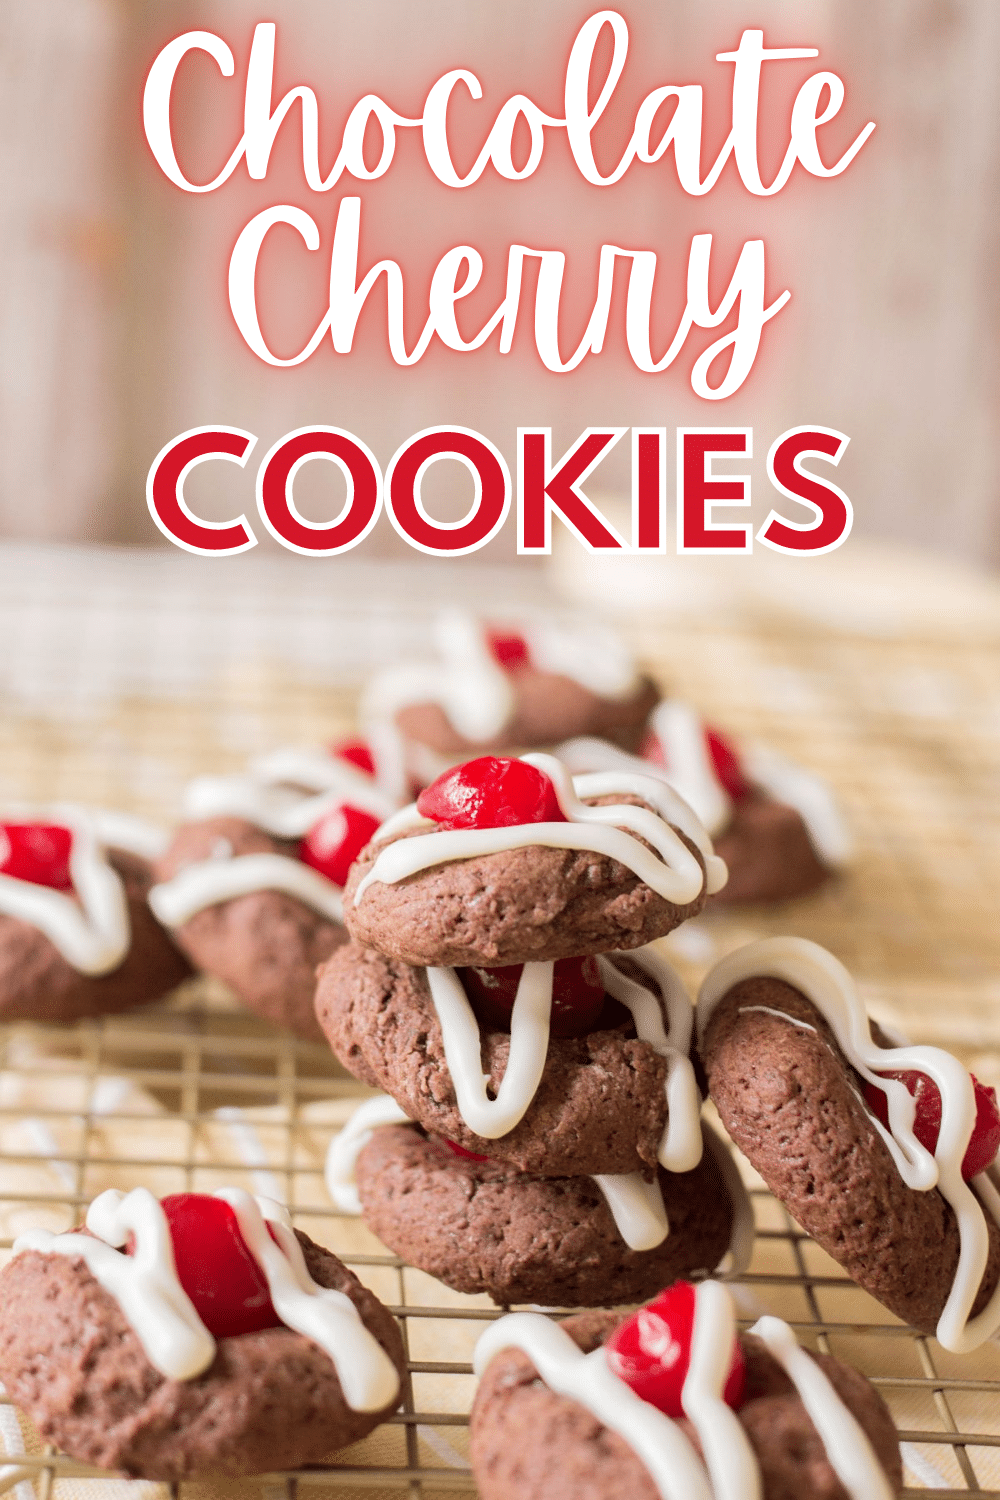 Vertical image of stacked Chocolate Cherry Cookies on a drying rack with a text on the upper part saying "Chocolate Cherry Cookies"